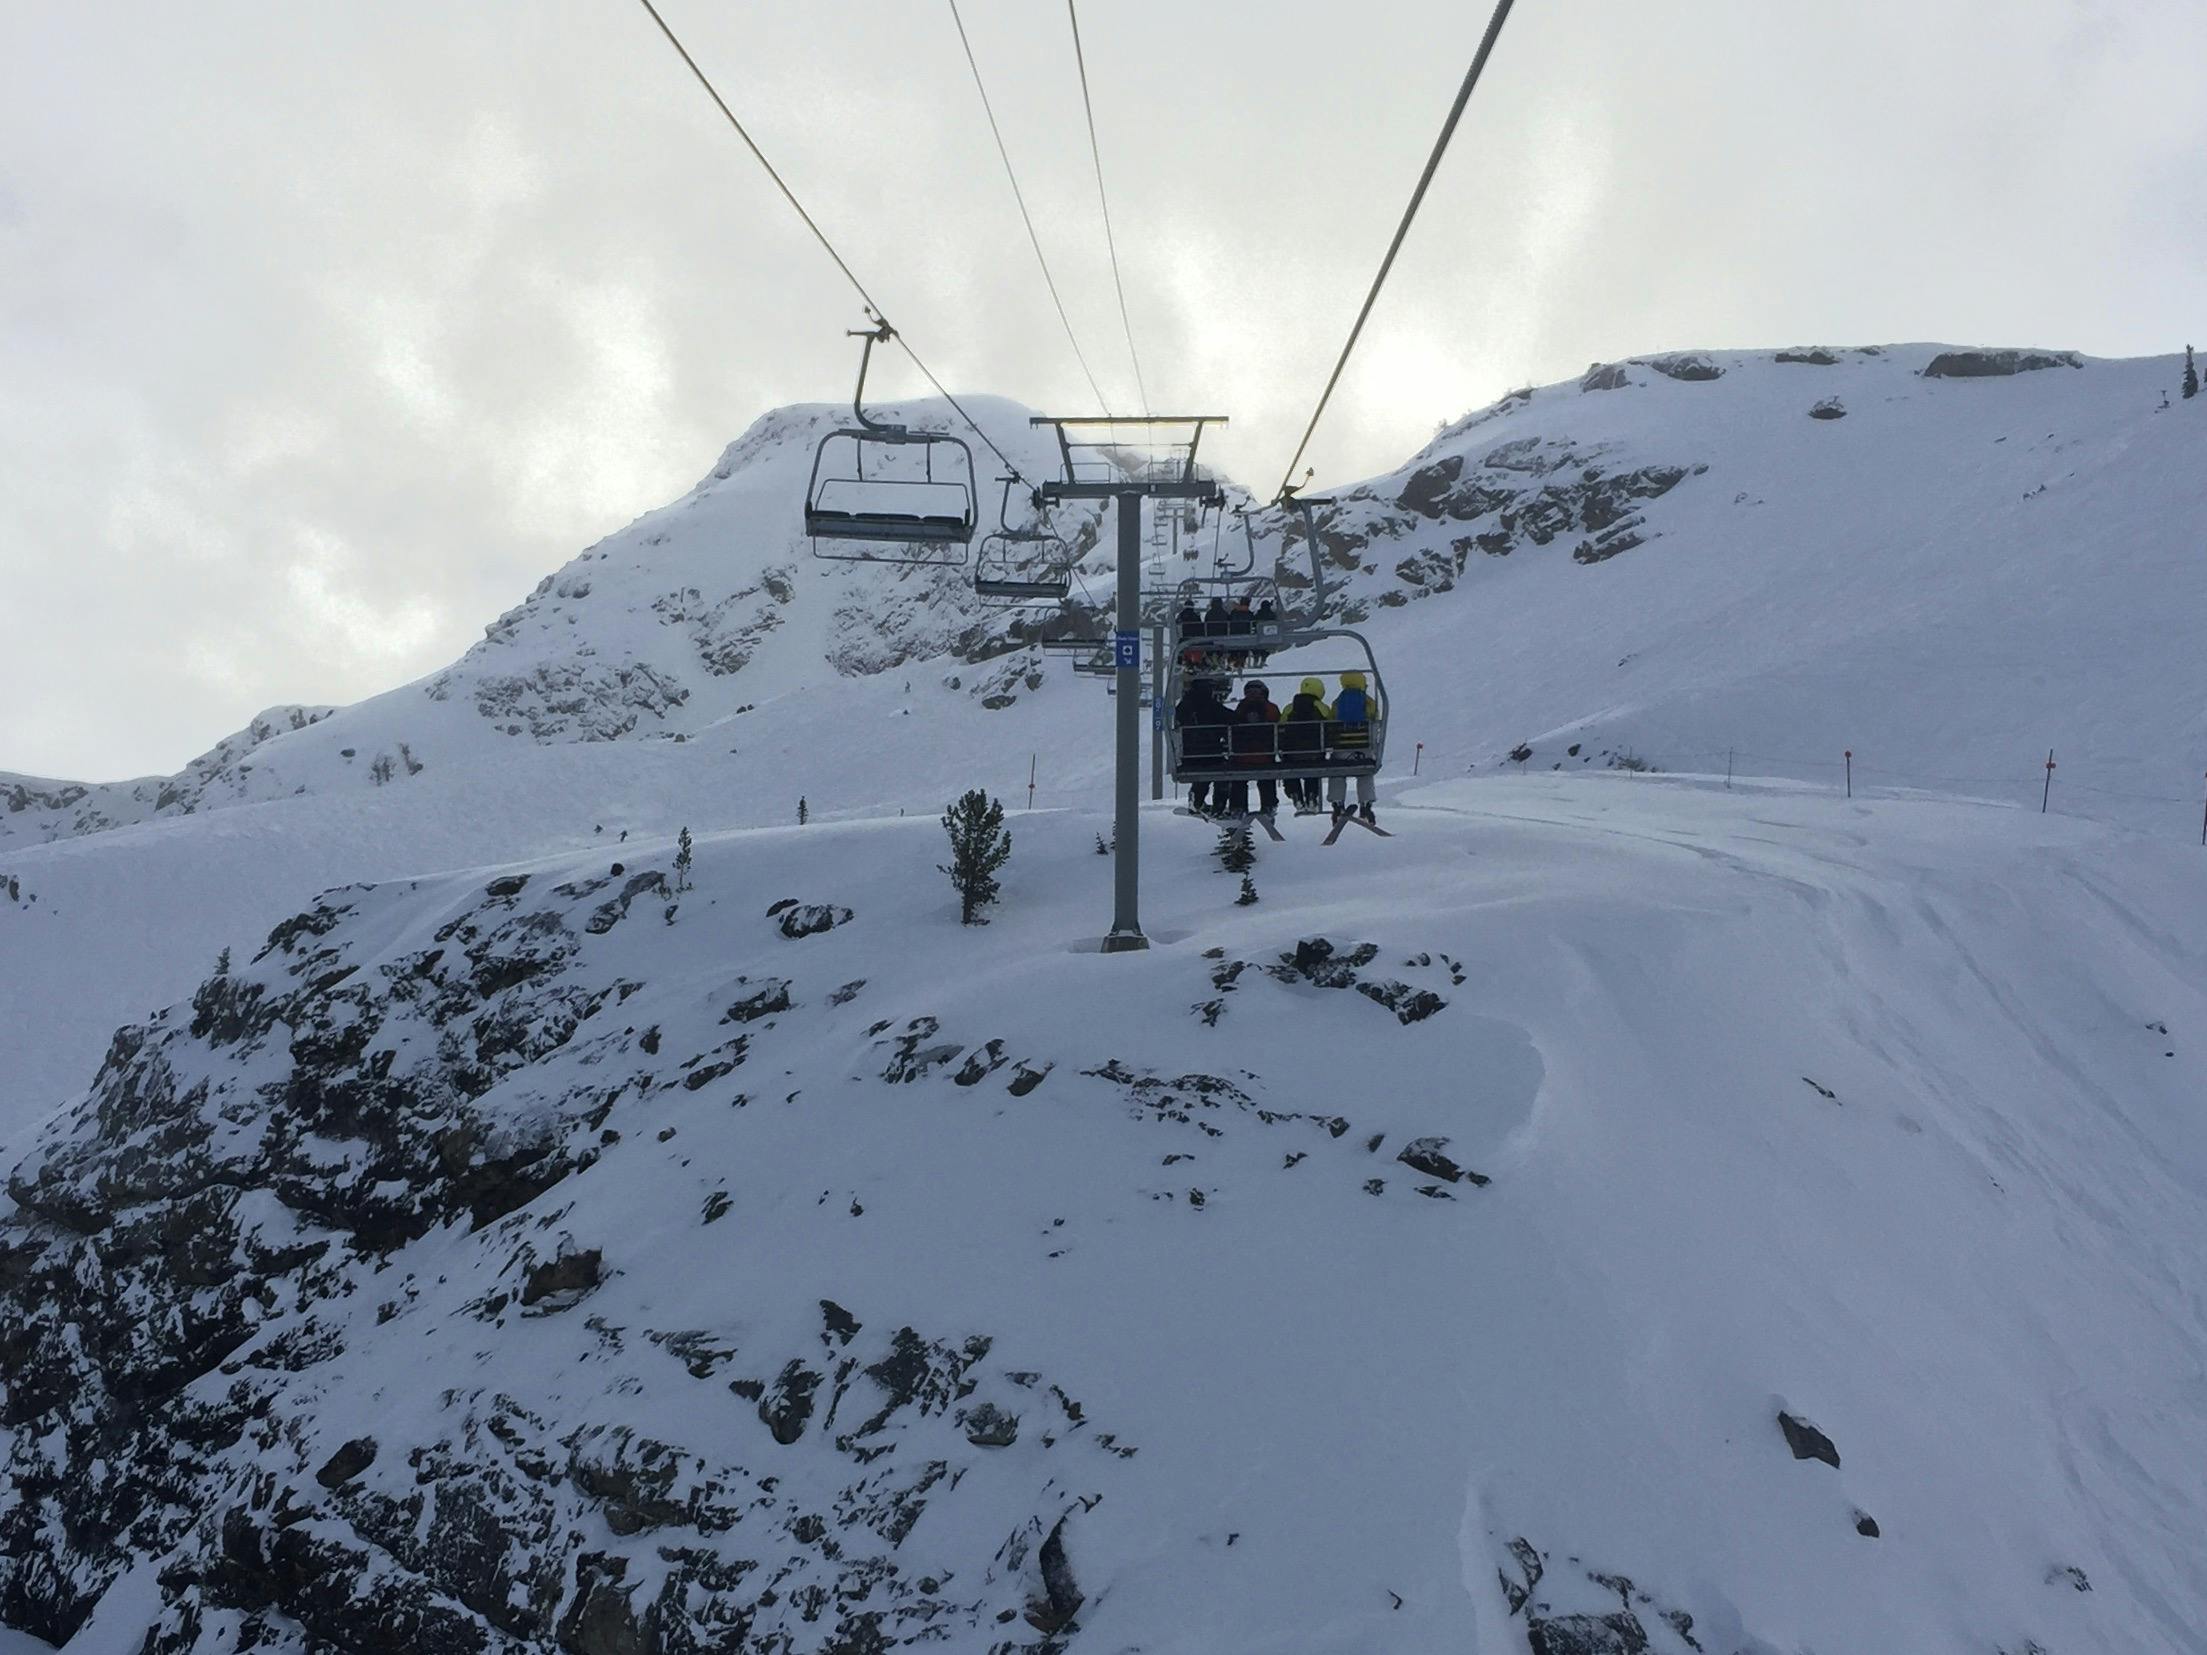 A chairlift on a snowy mountain.